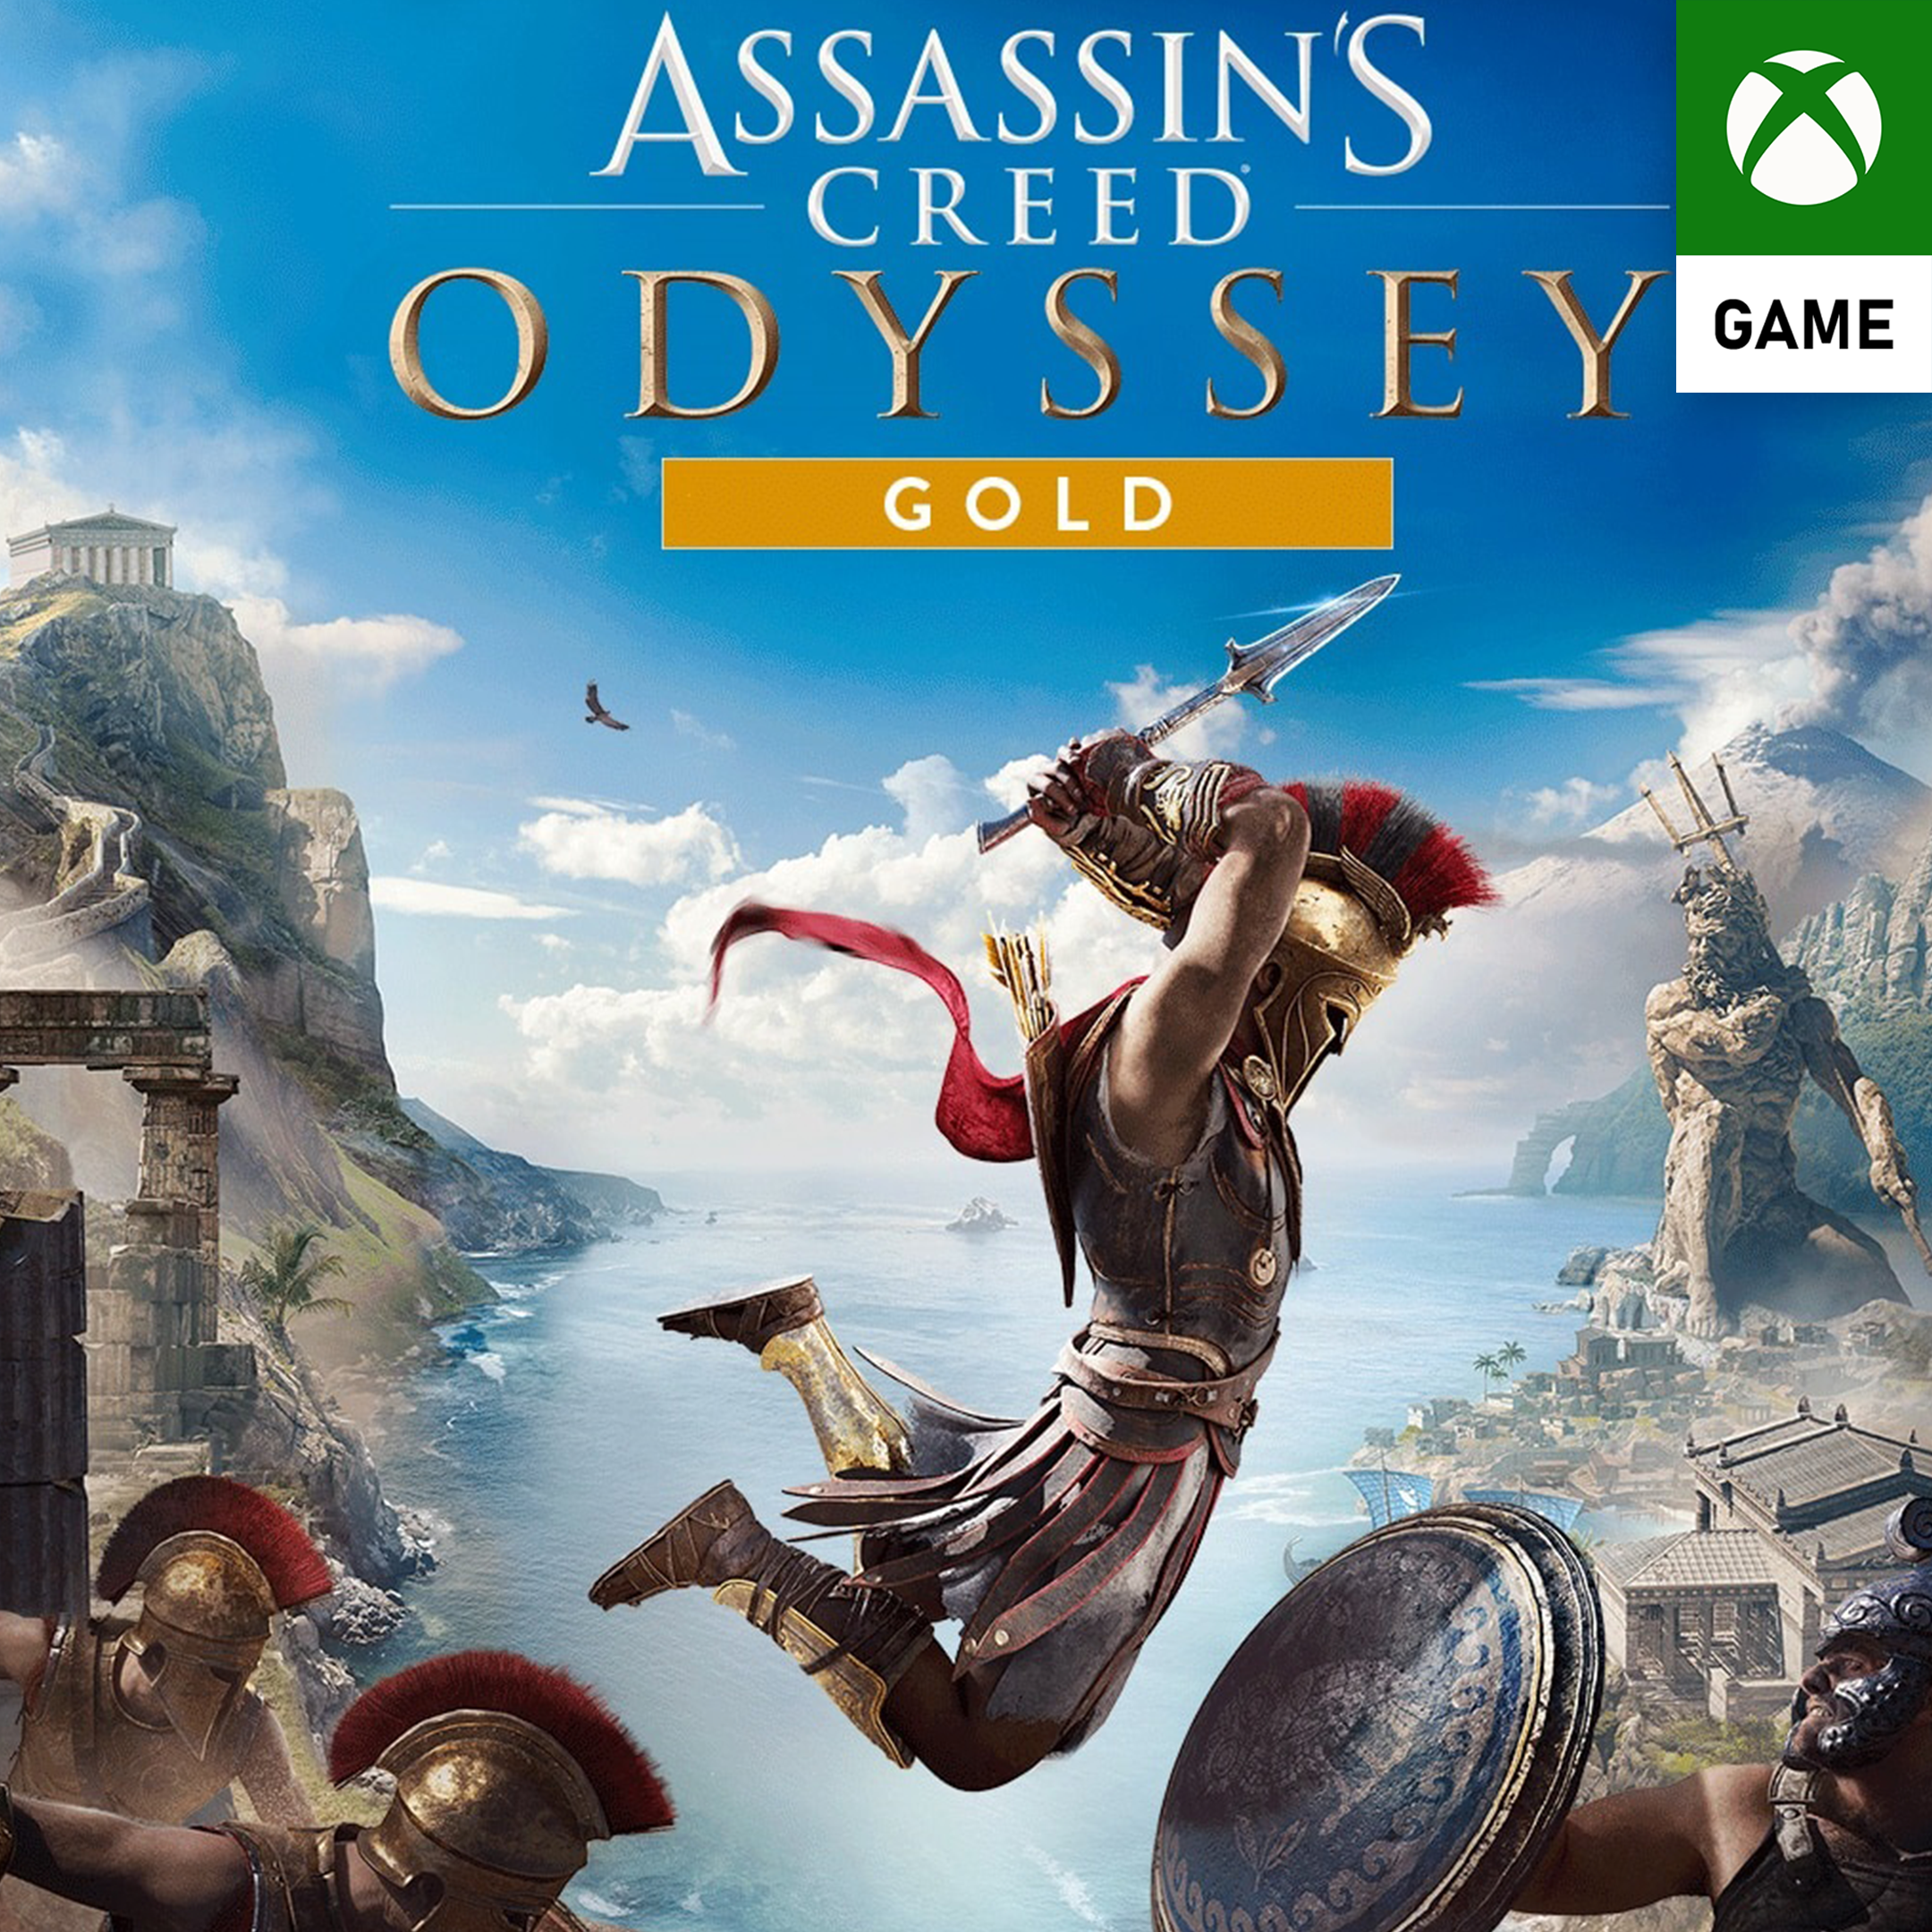 Assassin odyssey ps4. Assassin's Creed Odyssey Gold Edition ps4. Ассасин Крид Одиссей на ps4. Ассасин Крид Одиссея пс4. Ассасин Крид Одиссея ps4.